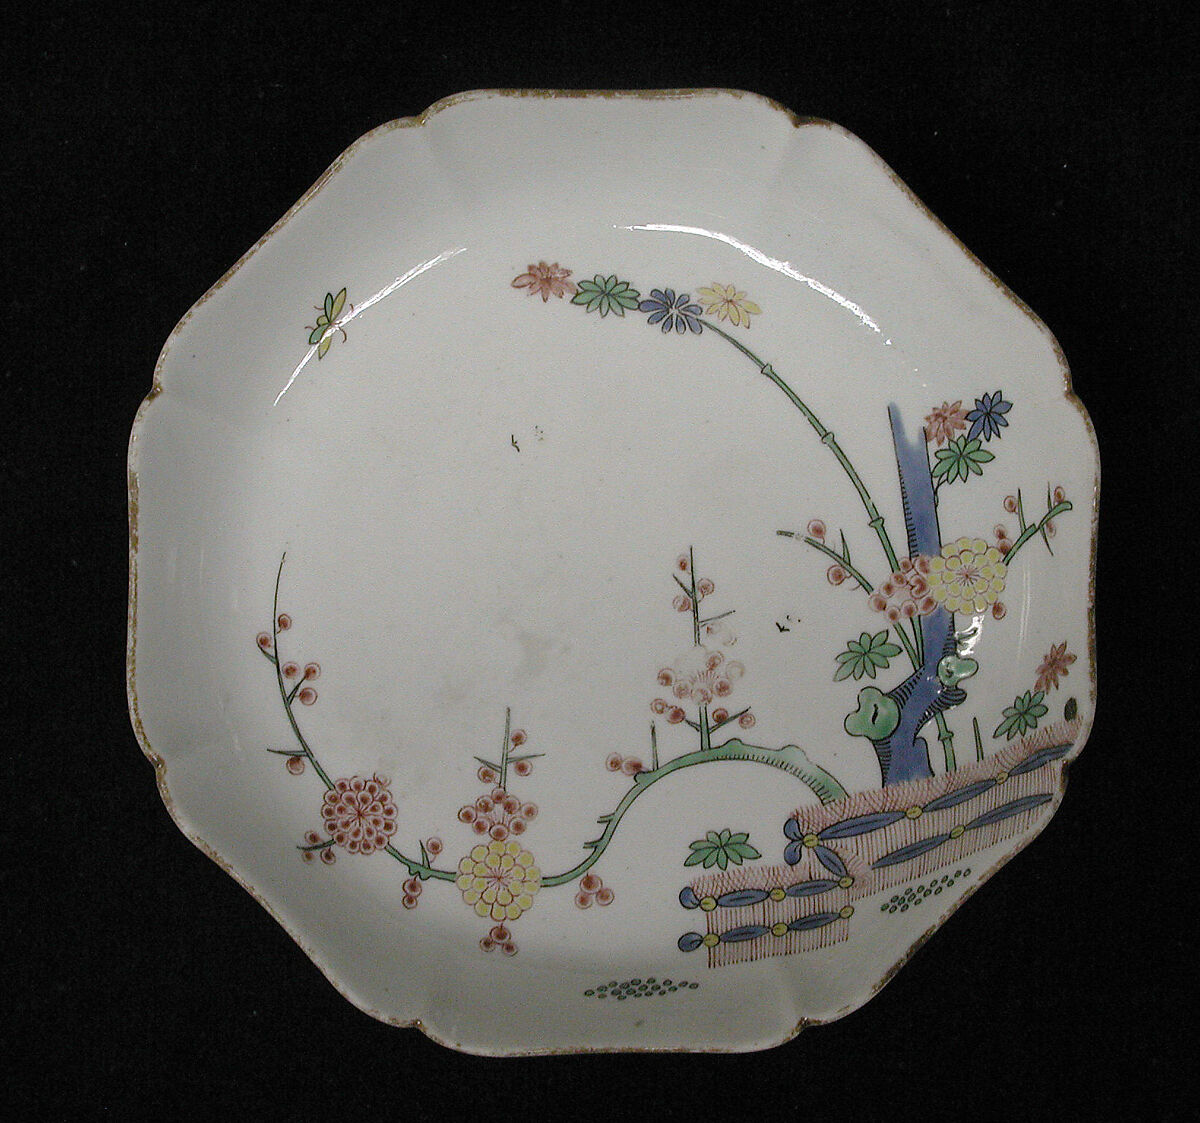 Dish, Chantilly (French), Soft-paste porcelain, French, Chantilly 